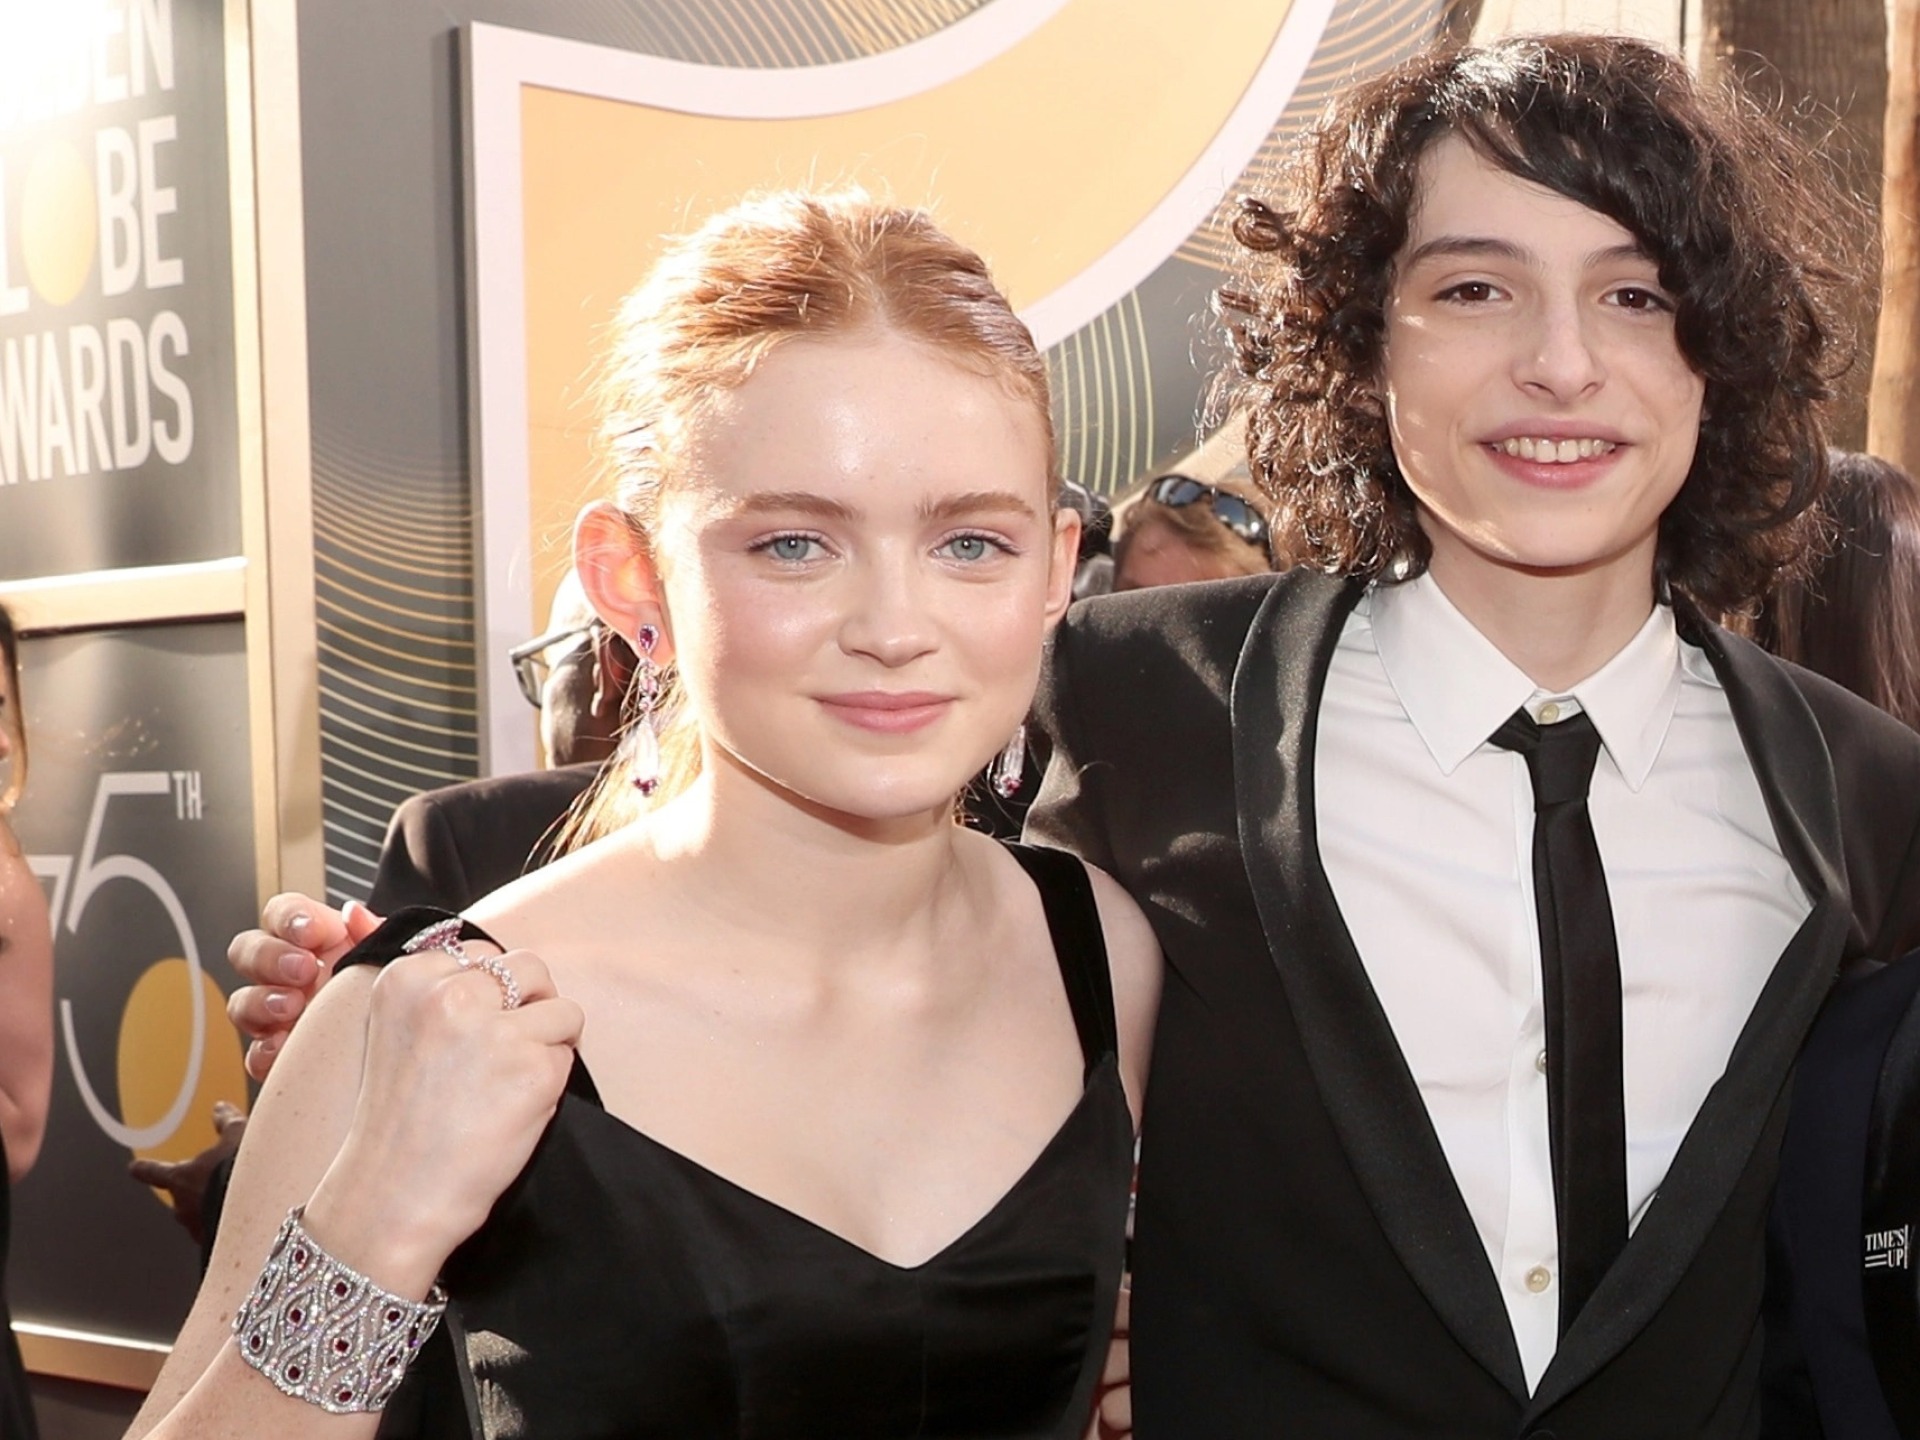 Are Sadie Sink and Finn Wolfhard dating?